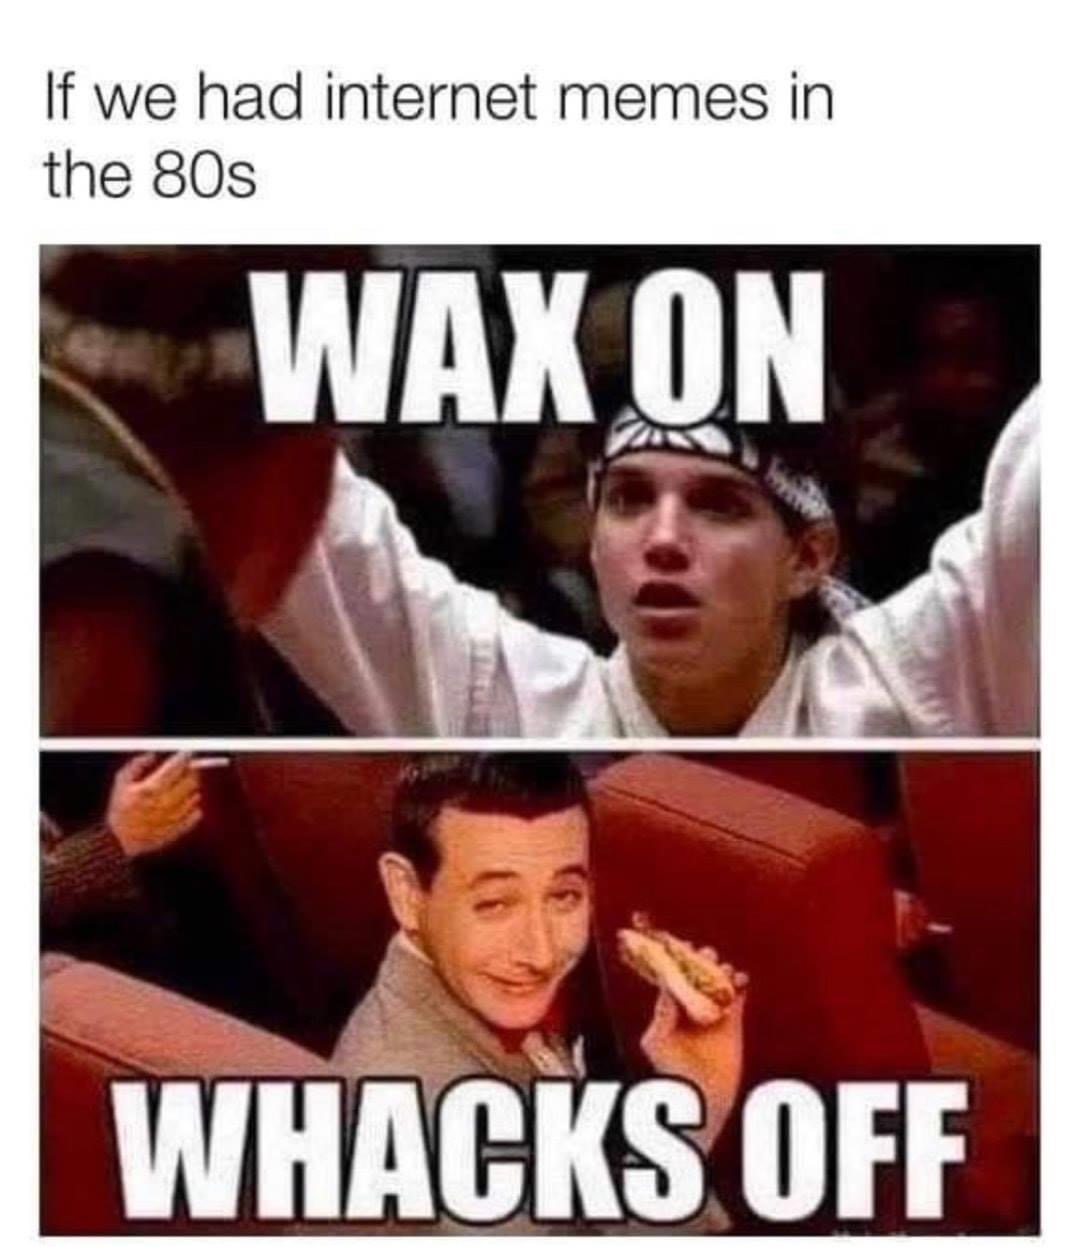 wax on whacks off meme - If we had internet memes in the 80s Wax On Whacks Off